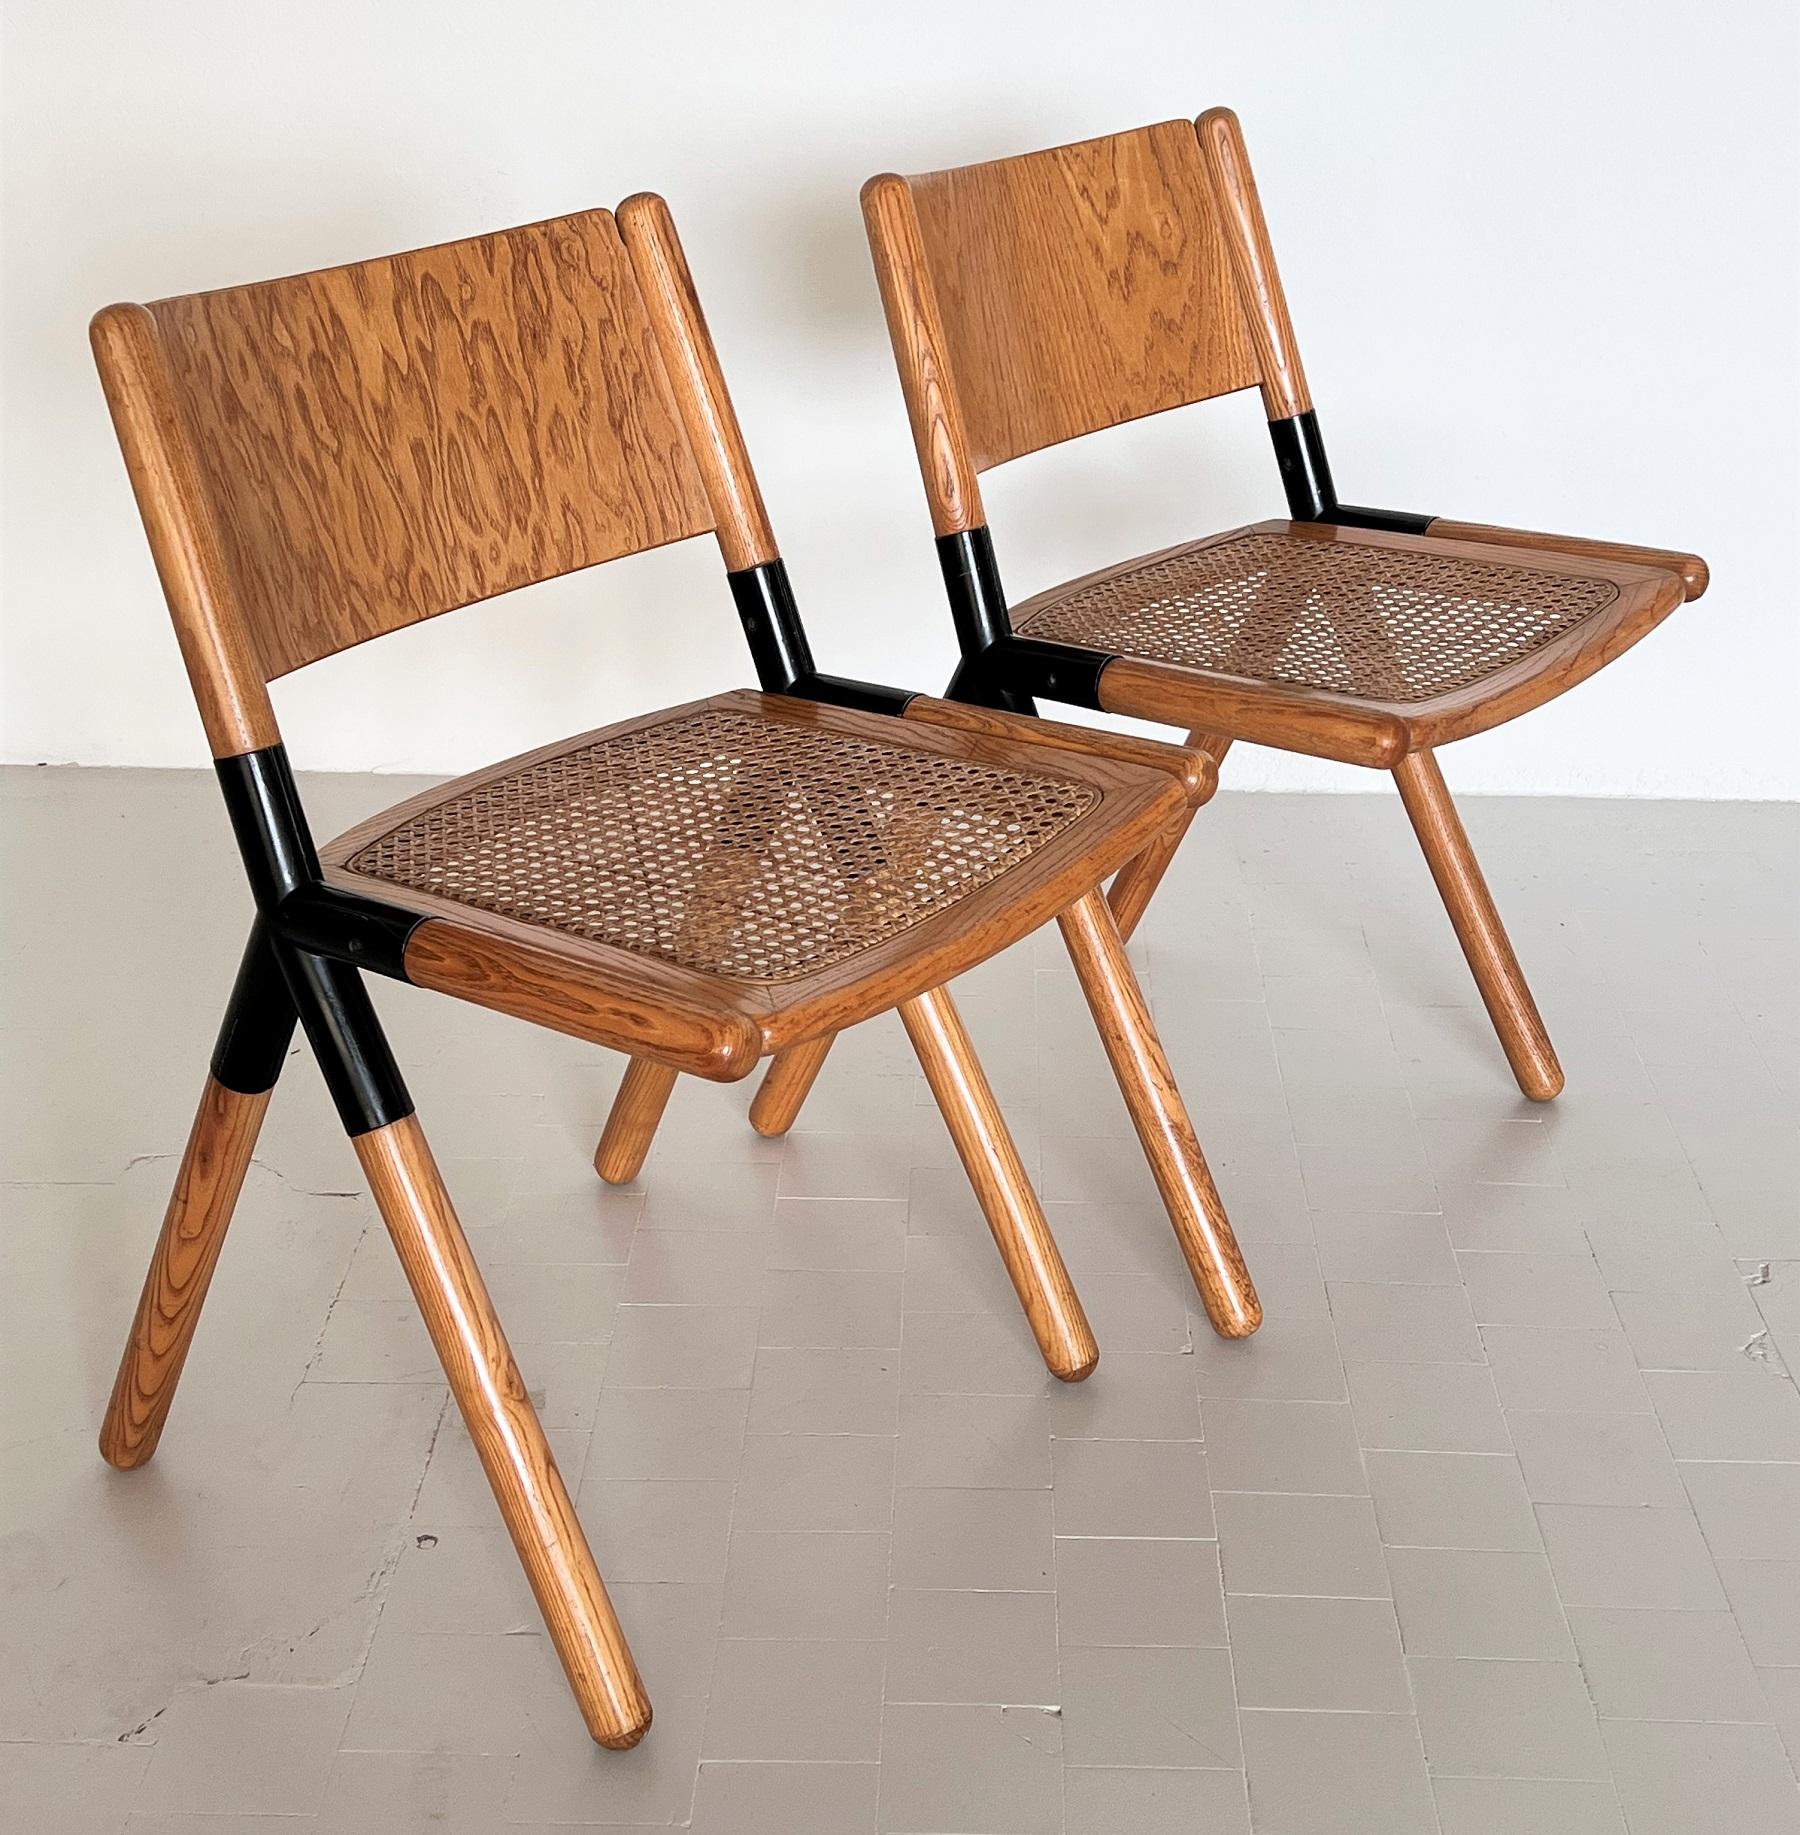 Italian Midcentury Chairs in Oak and Rattan by Mauro Pasquinelli, 1975 For Sale 12